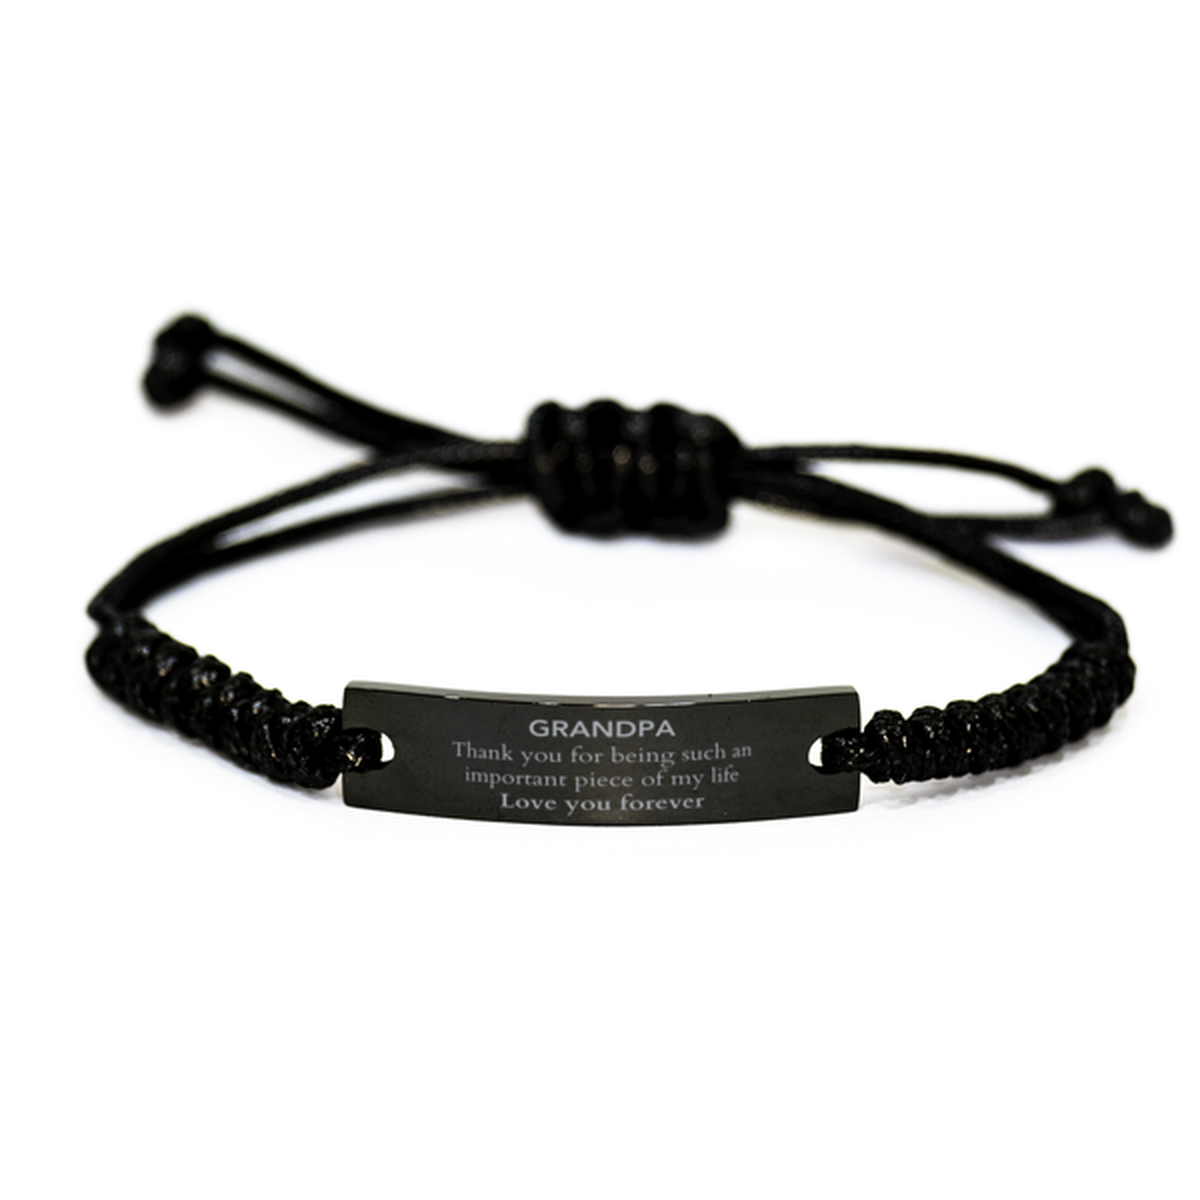 Appropriate Grandpa Black Rope Bracelet Epic Birthday Gifts for Grandpa Thank you for being such an important piece of my life Grandpa Christmas Mothers Fathers Day